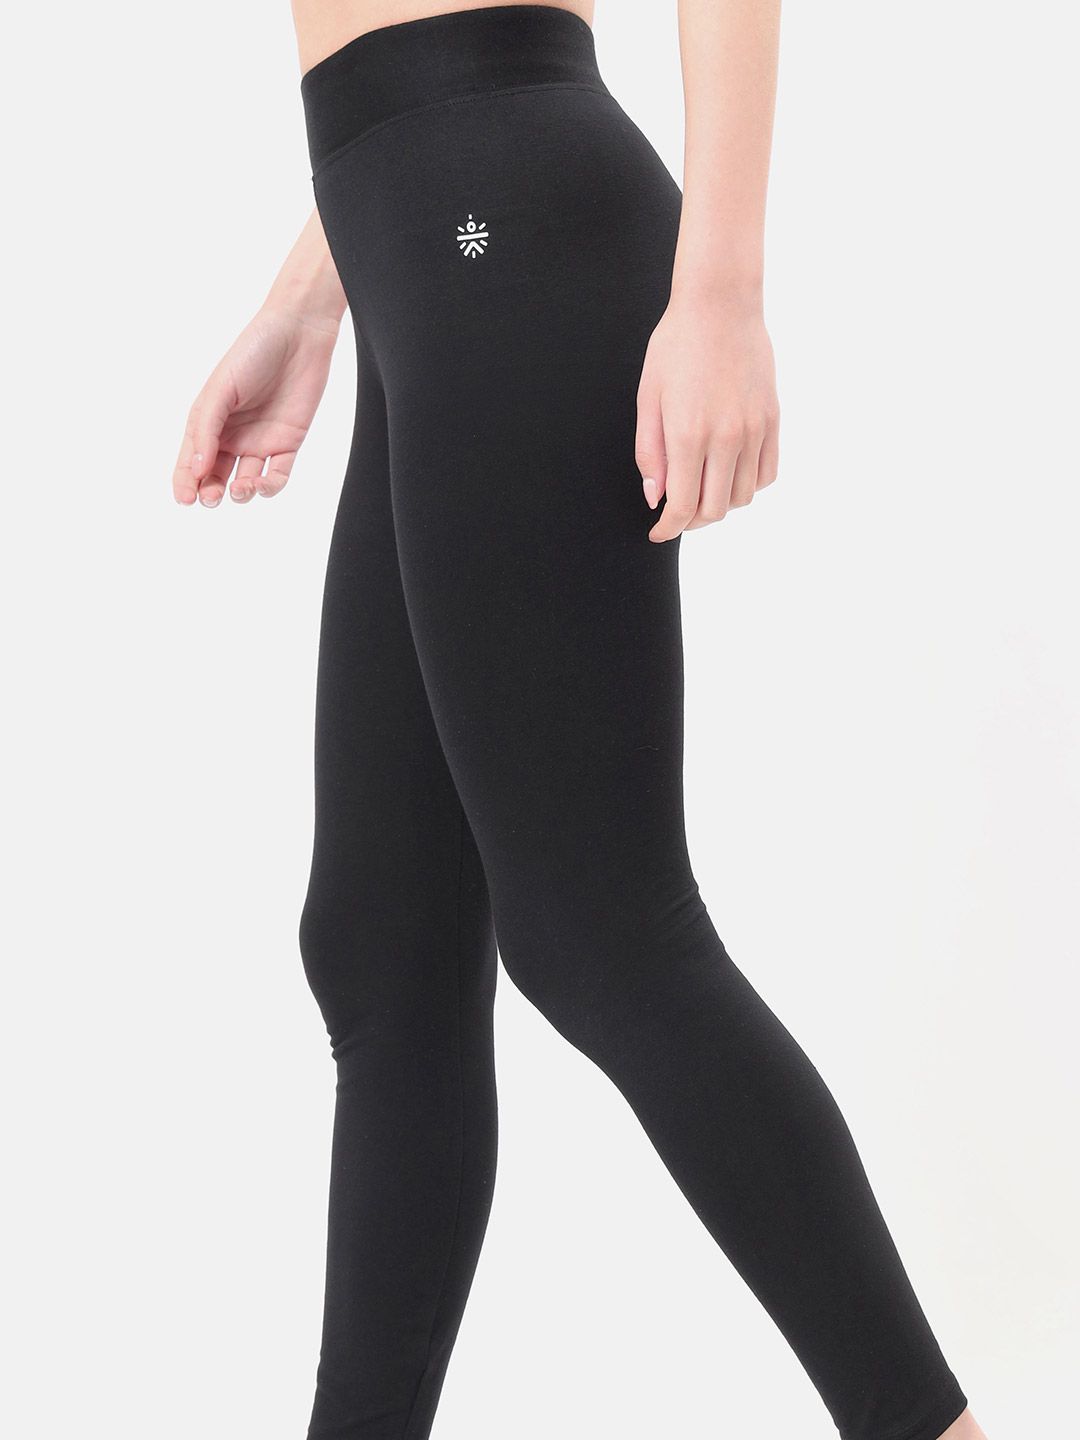 Buy JOCKEY Thermal Leggings (Off White, Size - S) Online - Best Price JOCKEY  Thermal Leggings (Off White, Size - S) - Justdial Shop Online.